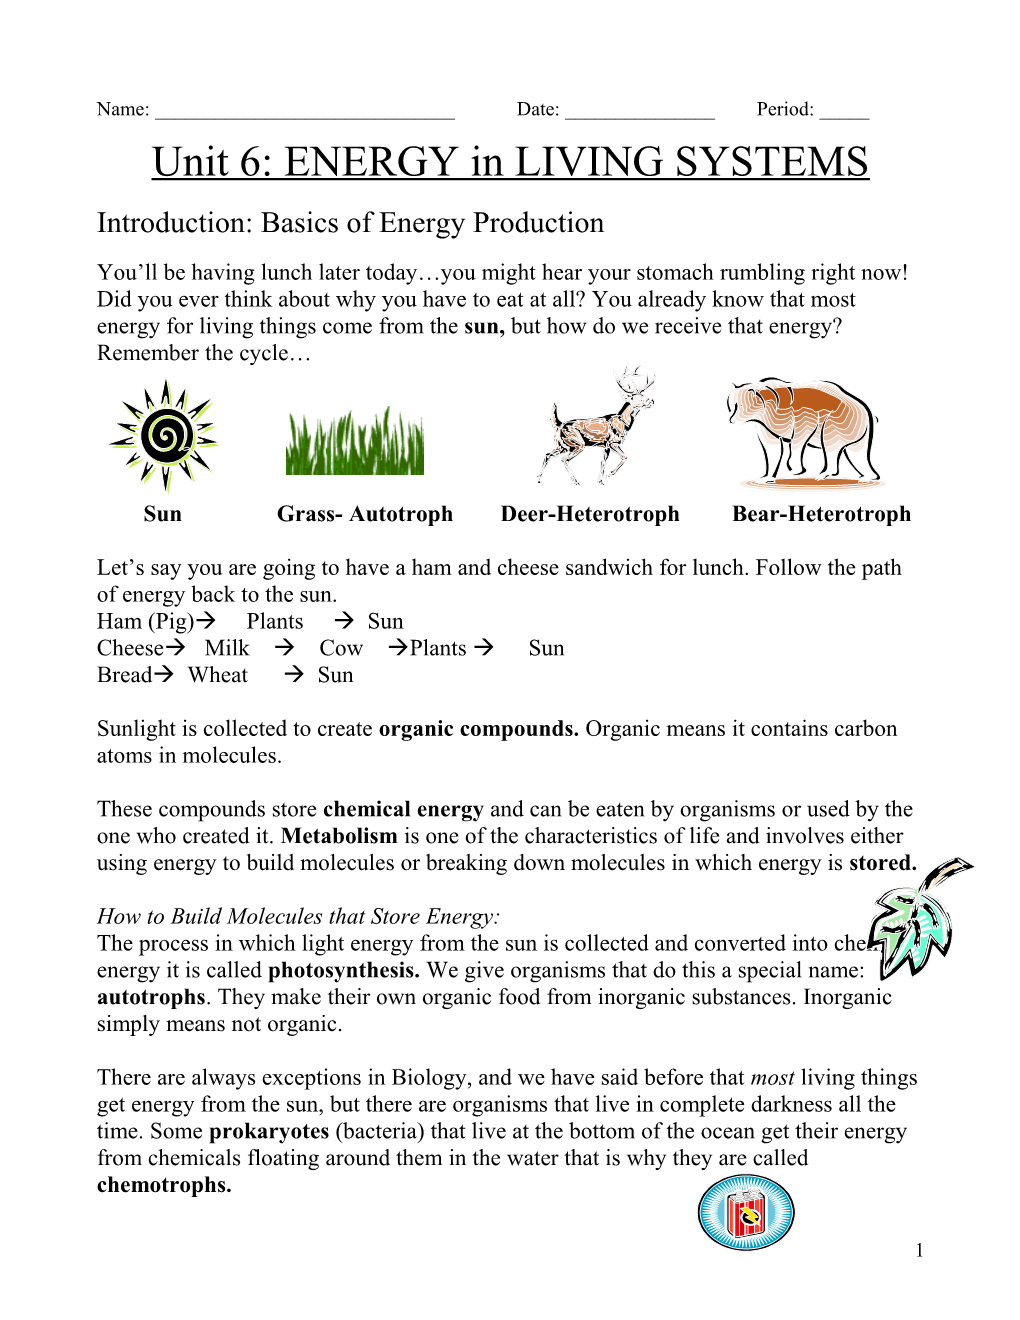 ENERGY in LIVING SYSTEMS